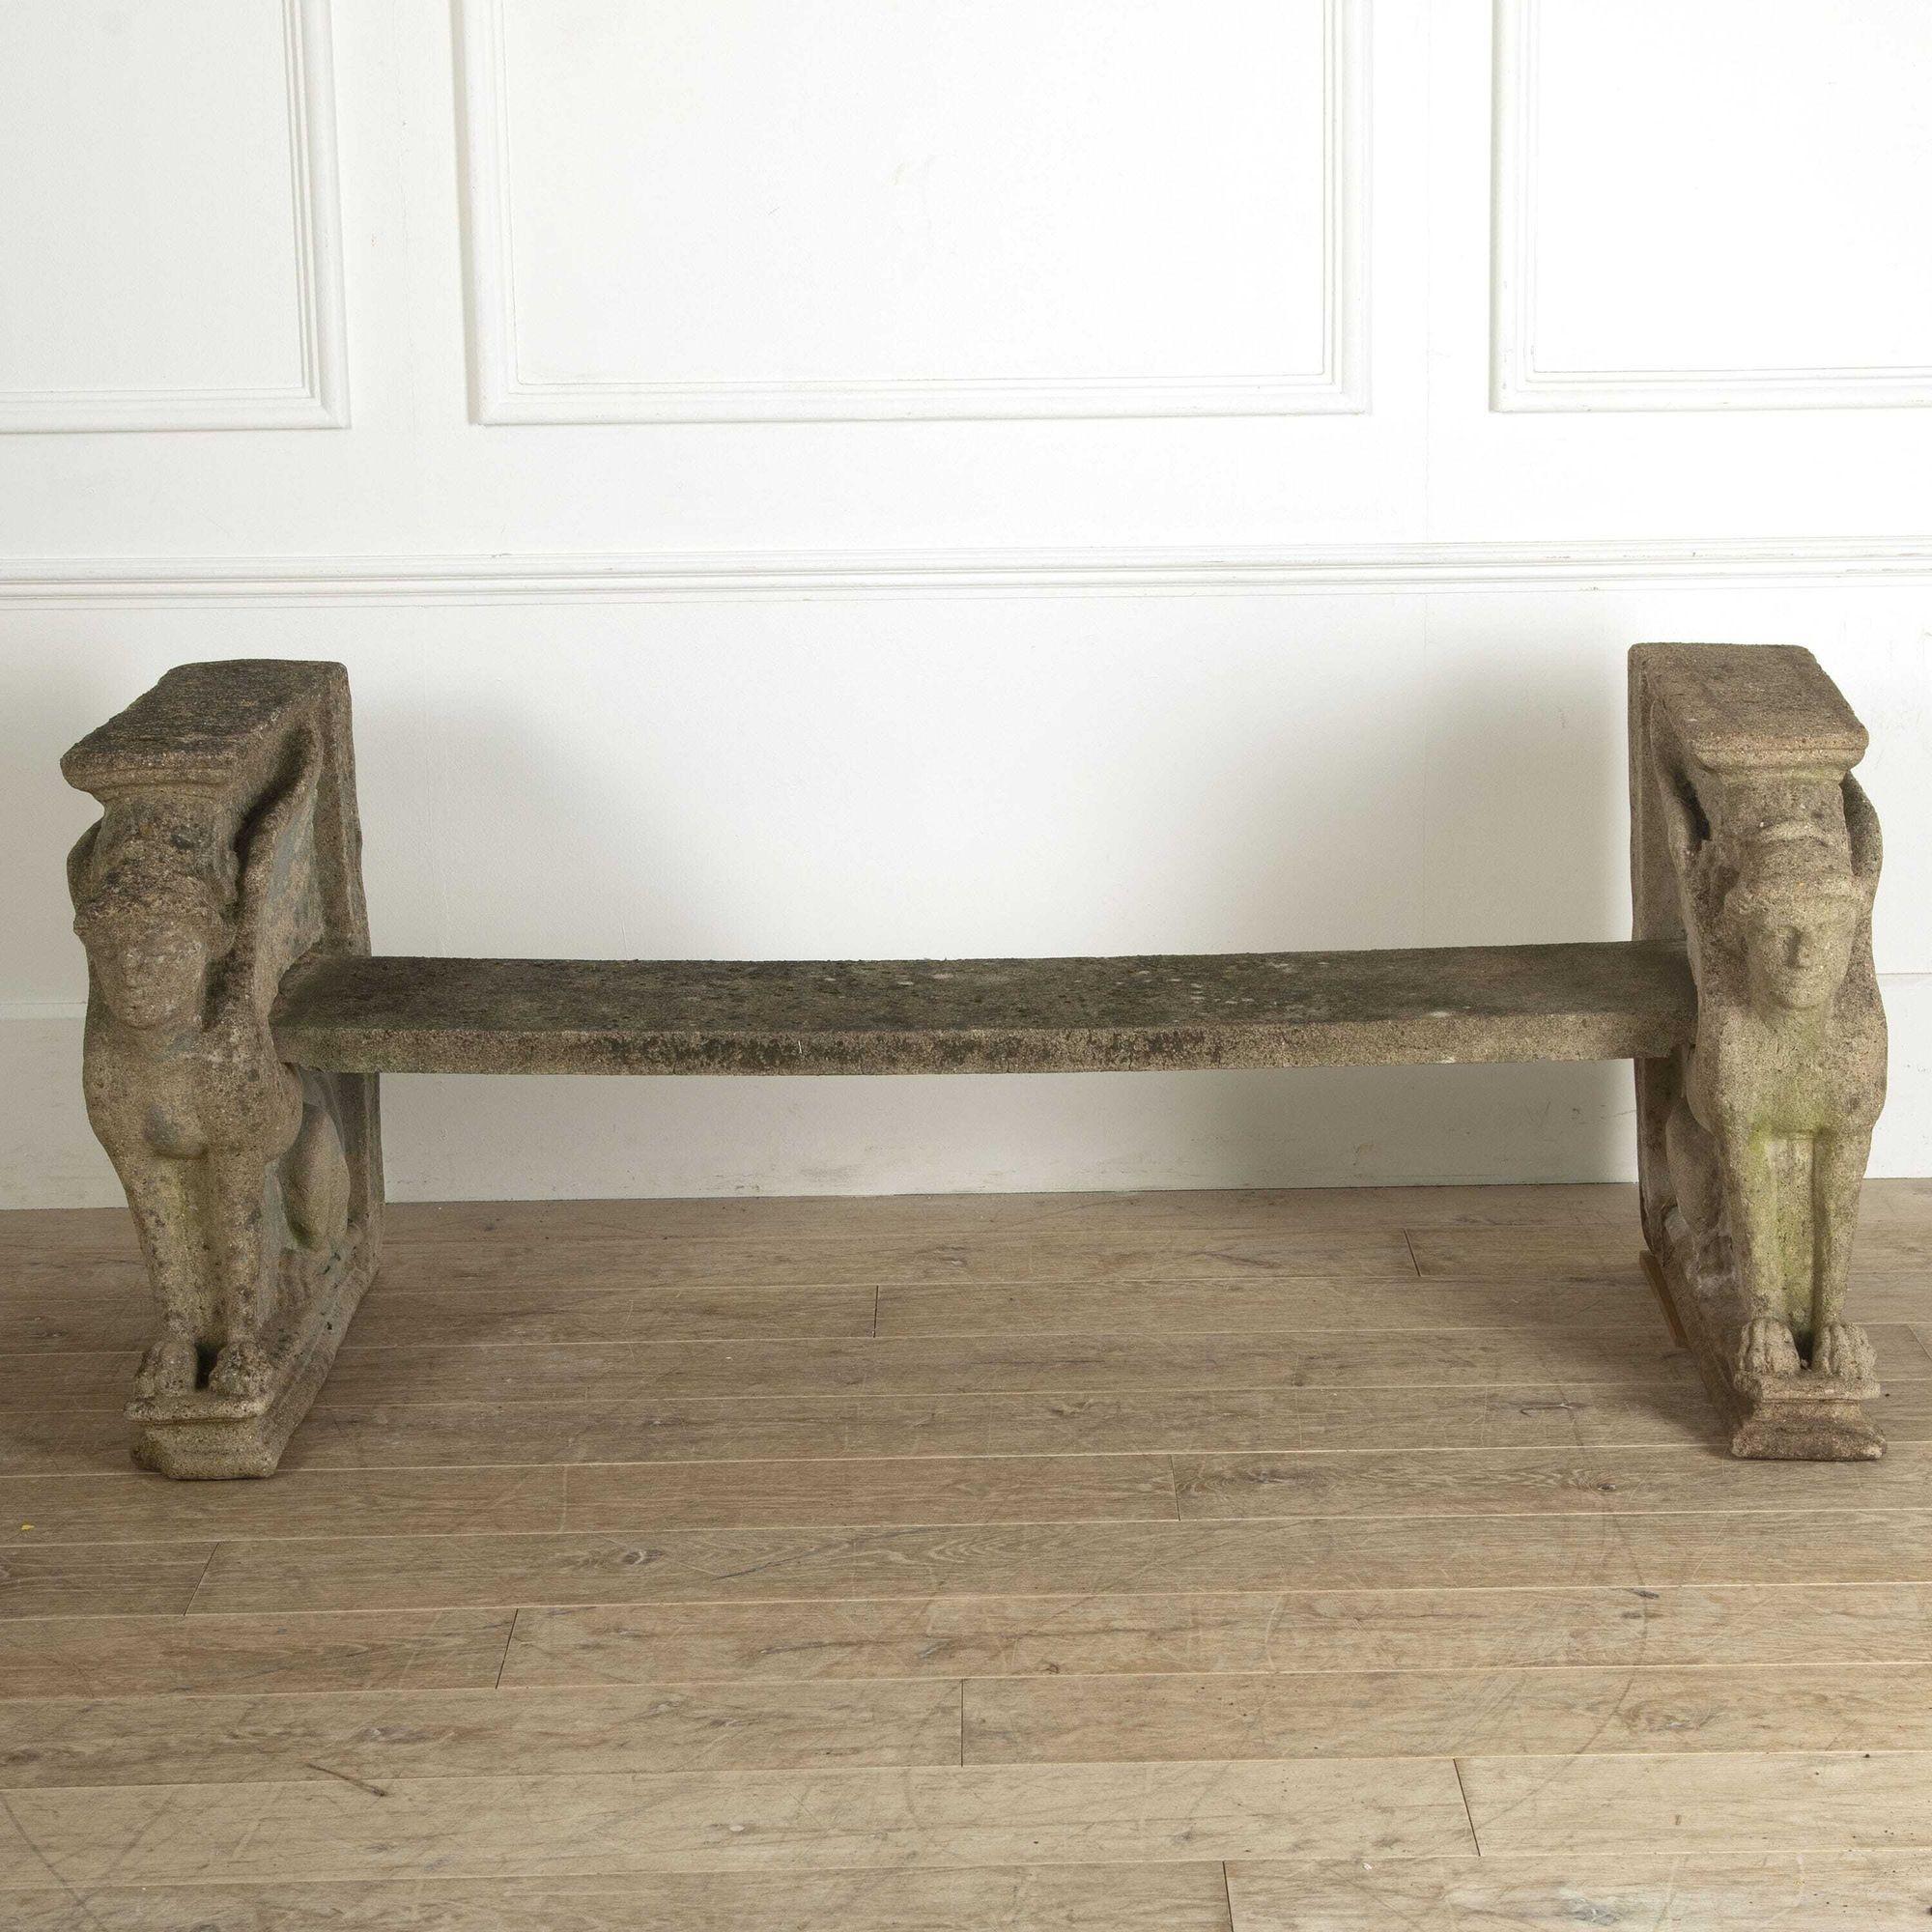 Country Pair of English Reconstituted Stone Garden Benches